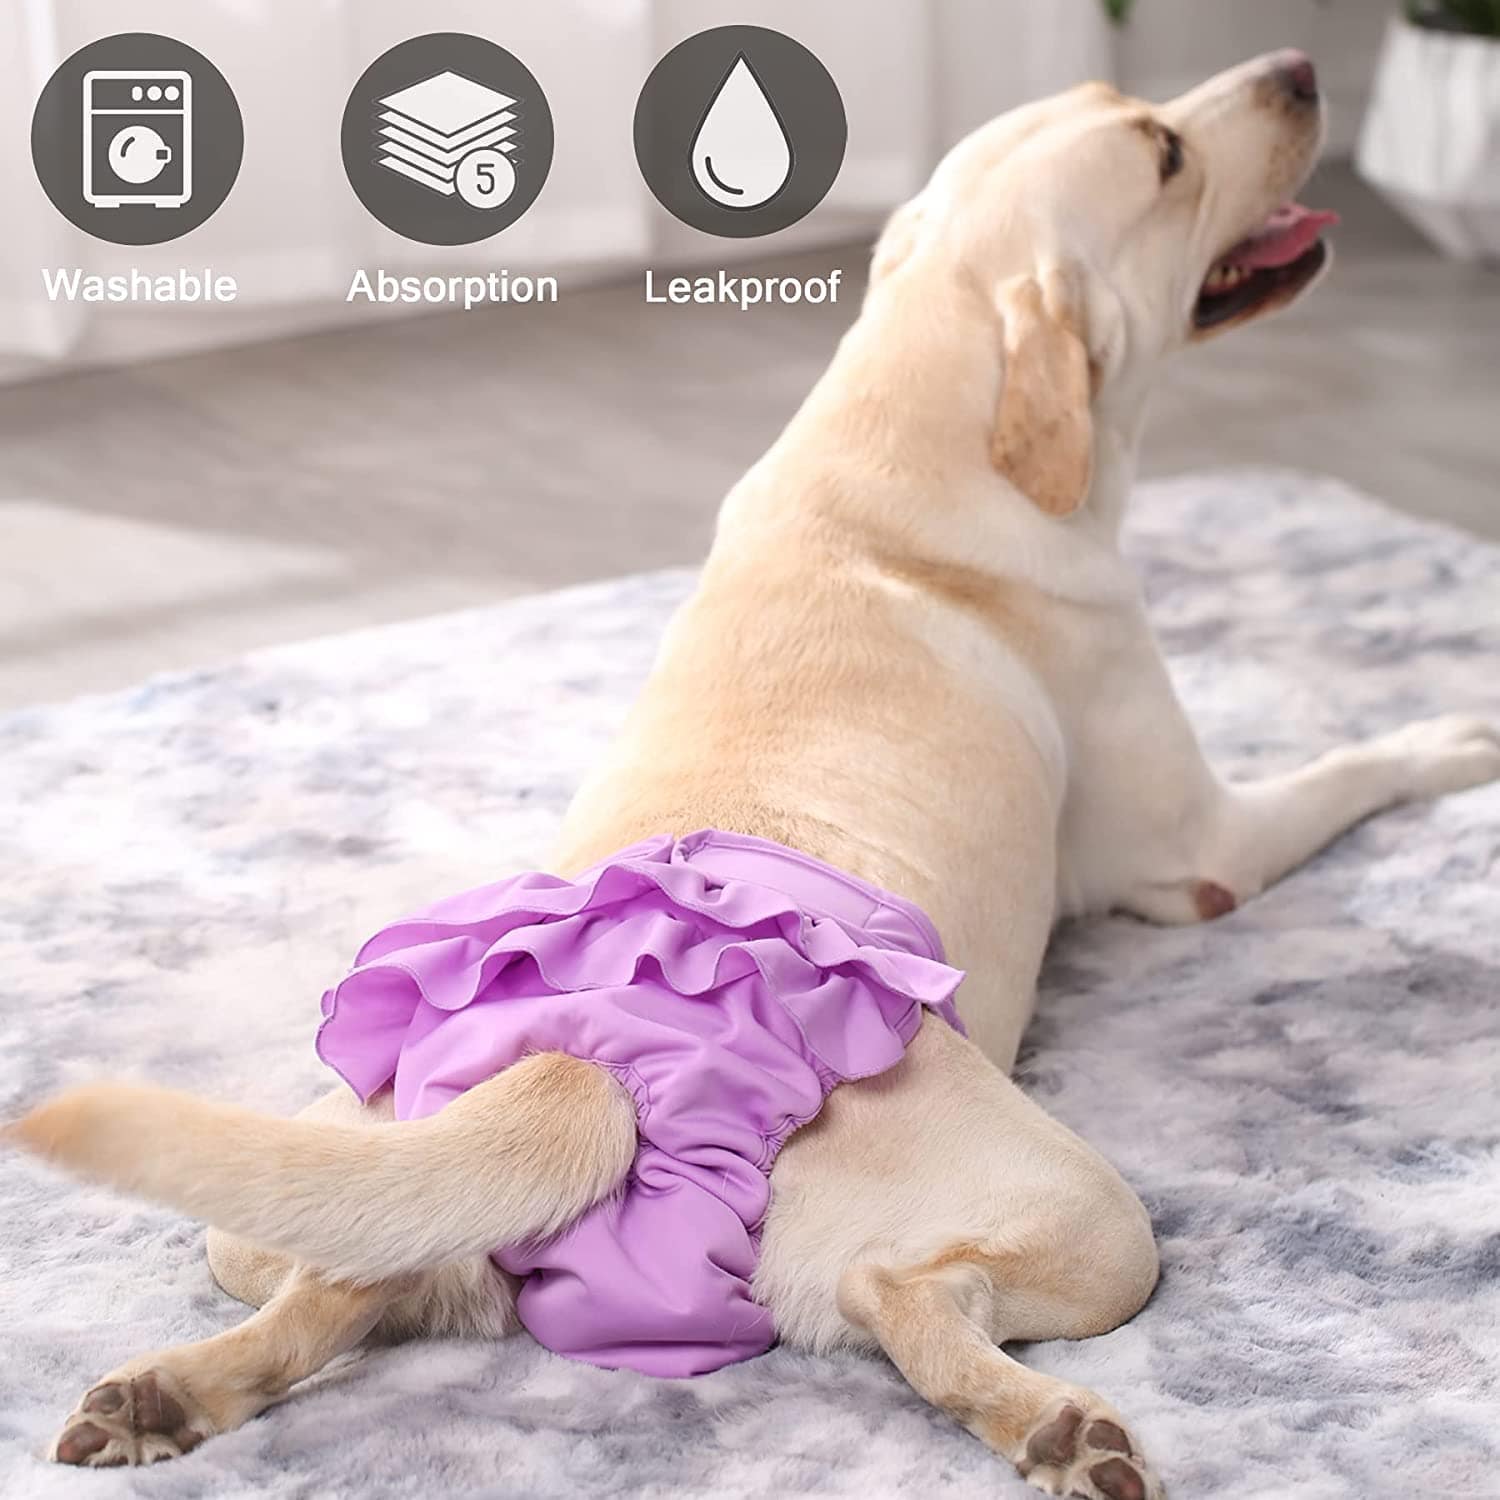 KUTKUT Dog Diapers Female, Washable Dog Diapers Highly Absorbent Reusable Doggie Diapers for Dog Period Panties Dresses for Dogs in Heat, Period or Excitable Urination ( Purple) - kutkutstyle